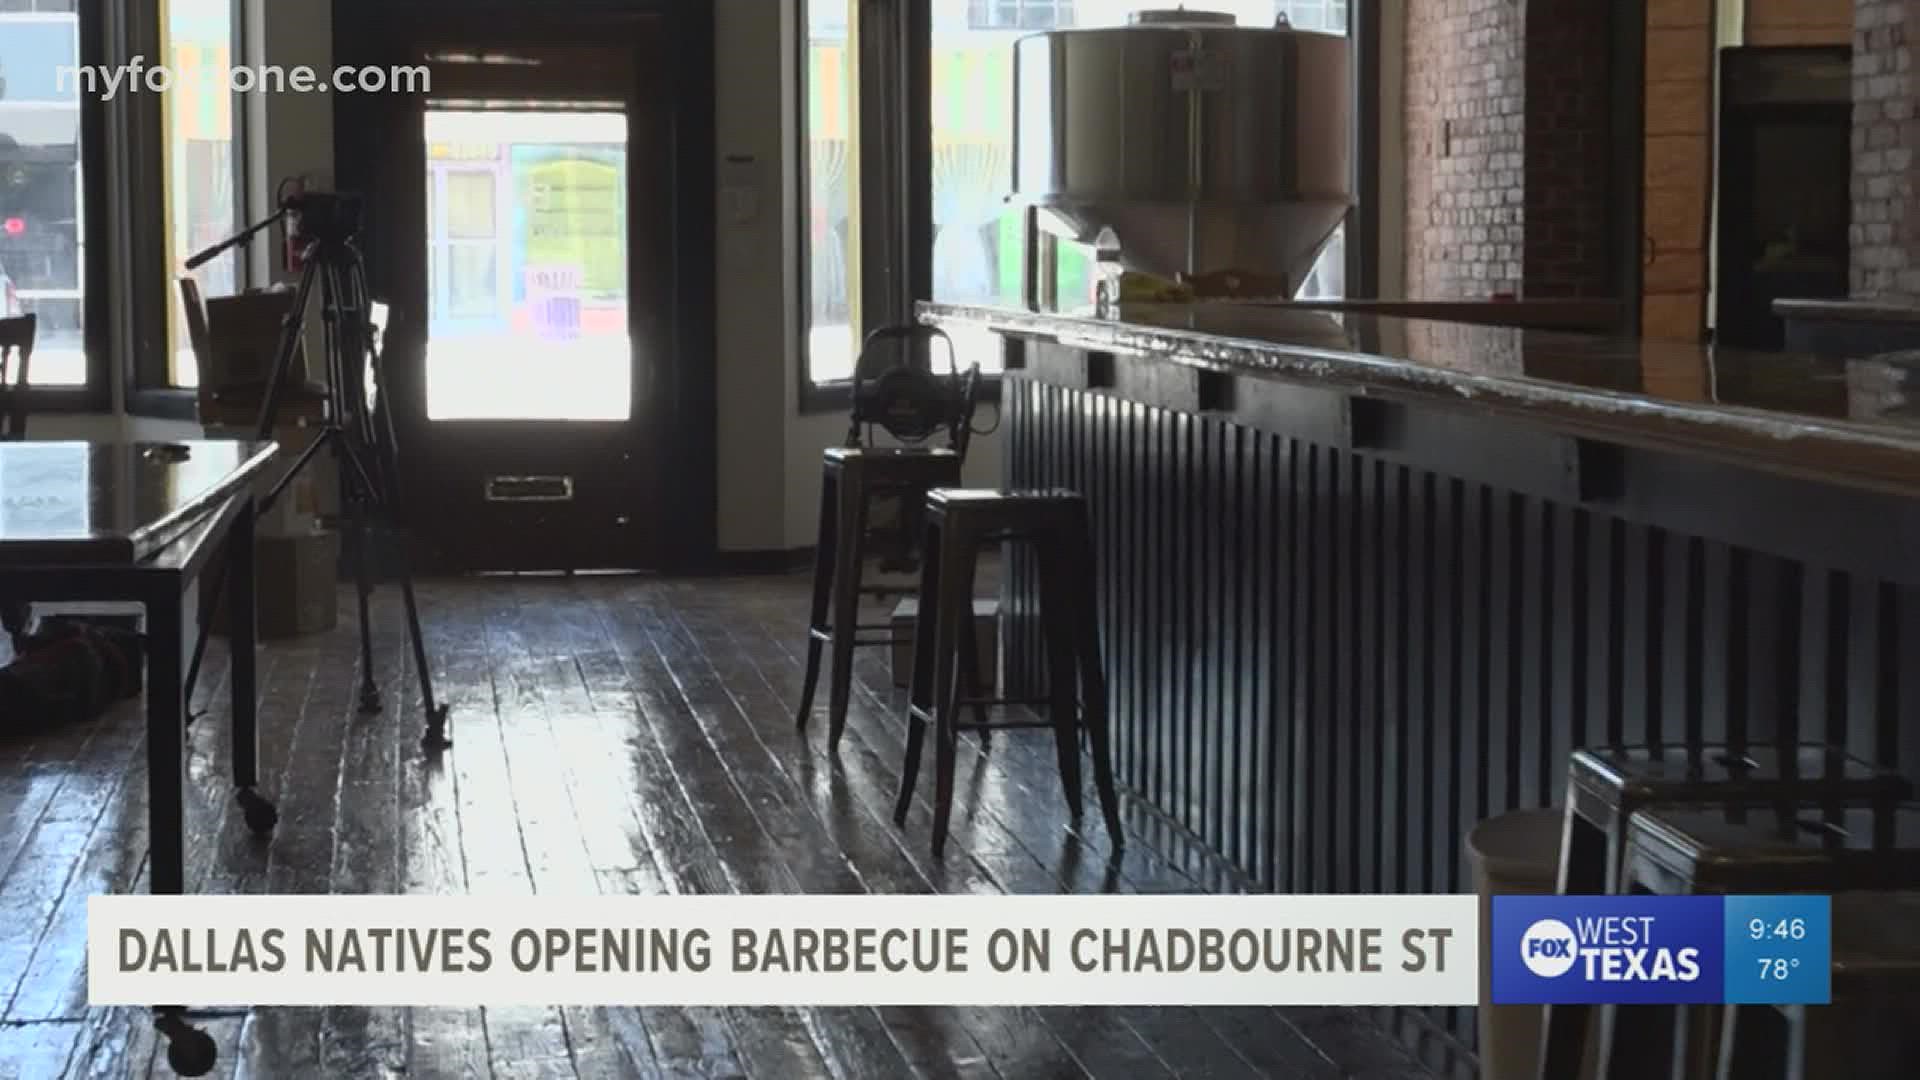 As expansion continues downtown, one restaurant owner saw Chadbourne Street as the perfect place to open his business